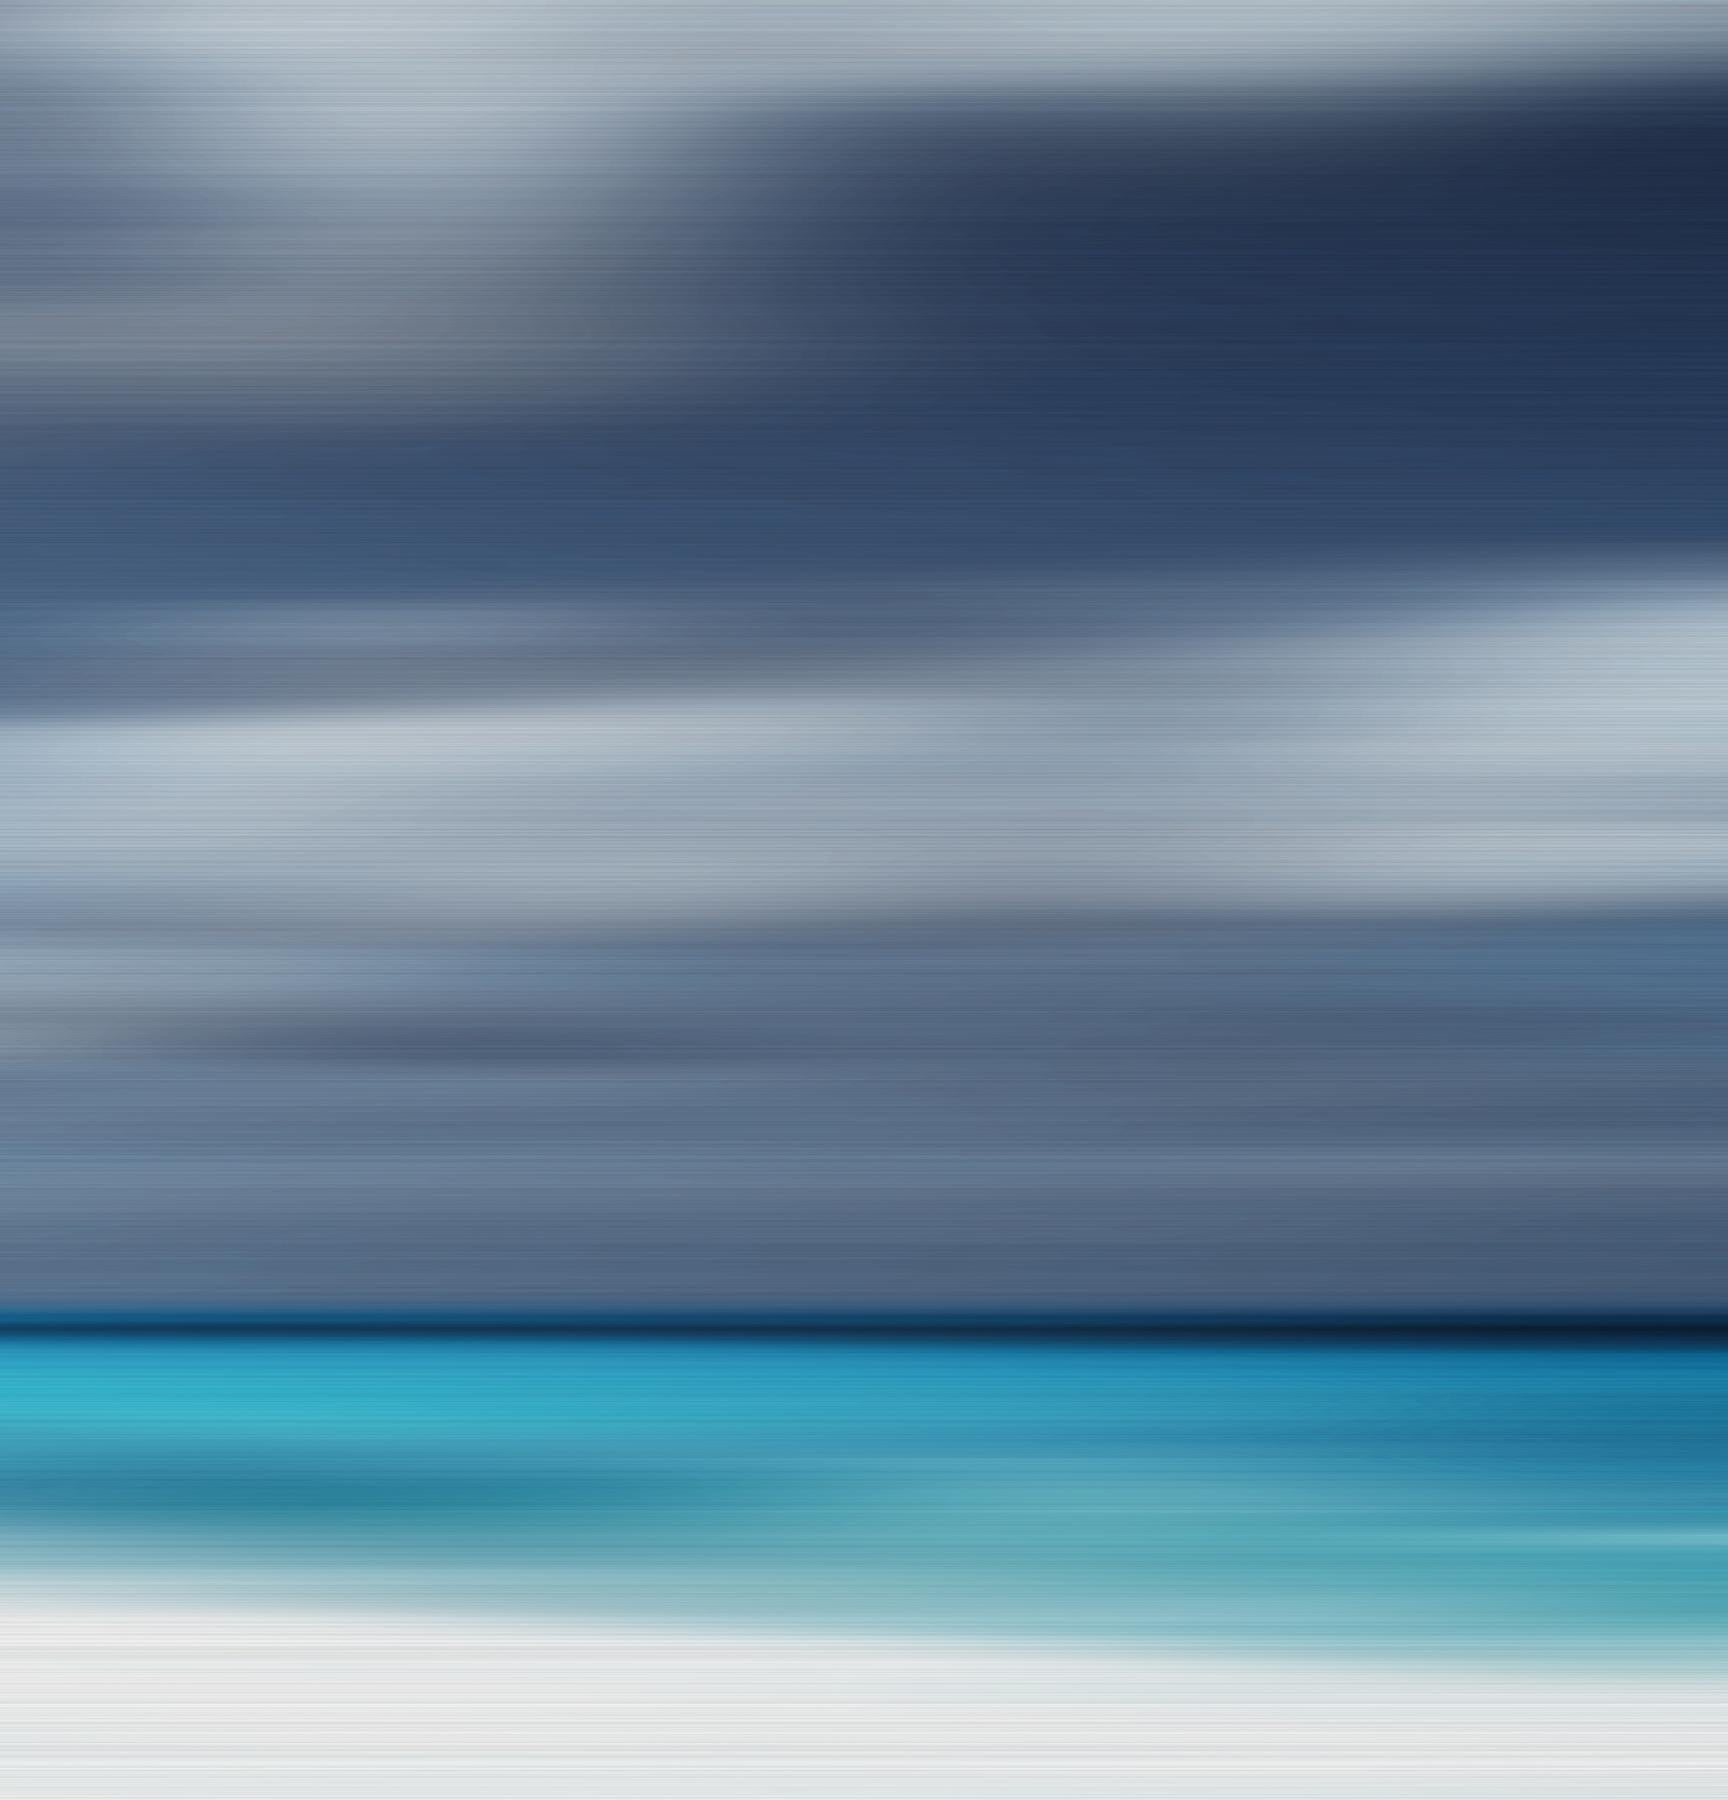 Cerulean - nature, contemporary, abstracted landscape, photography on dibond - Photograph by Etienne Labbe